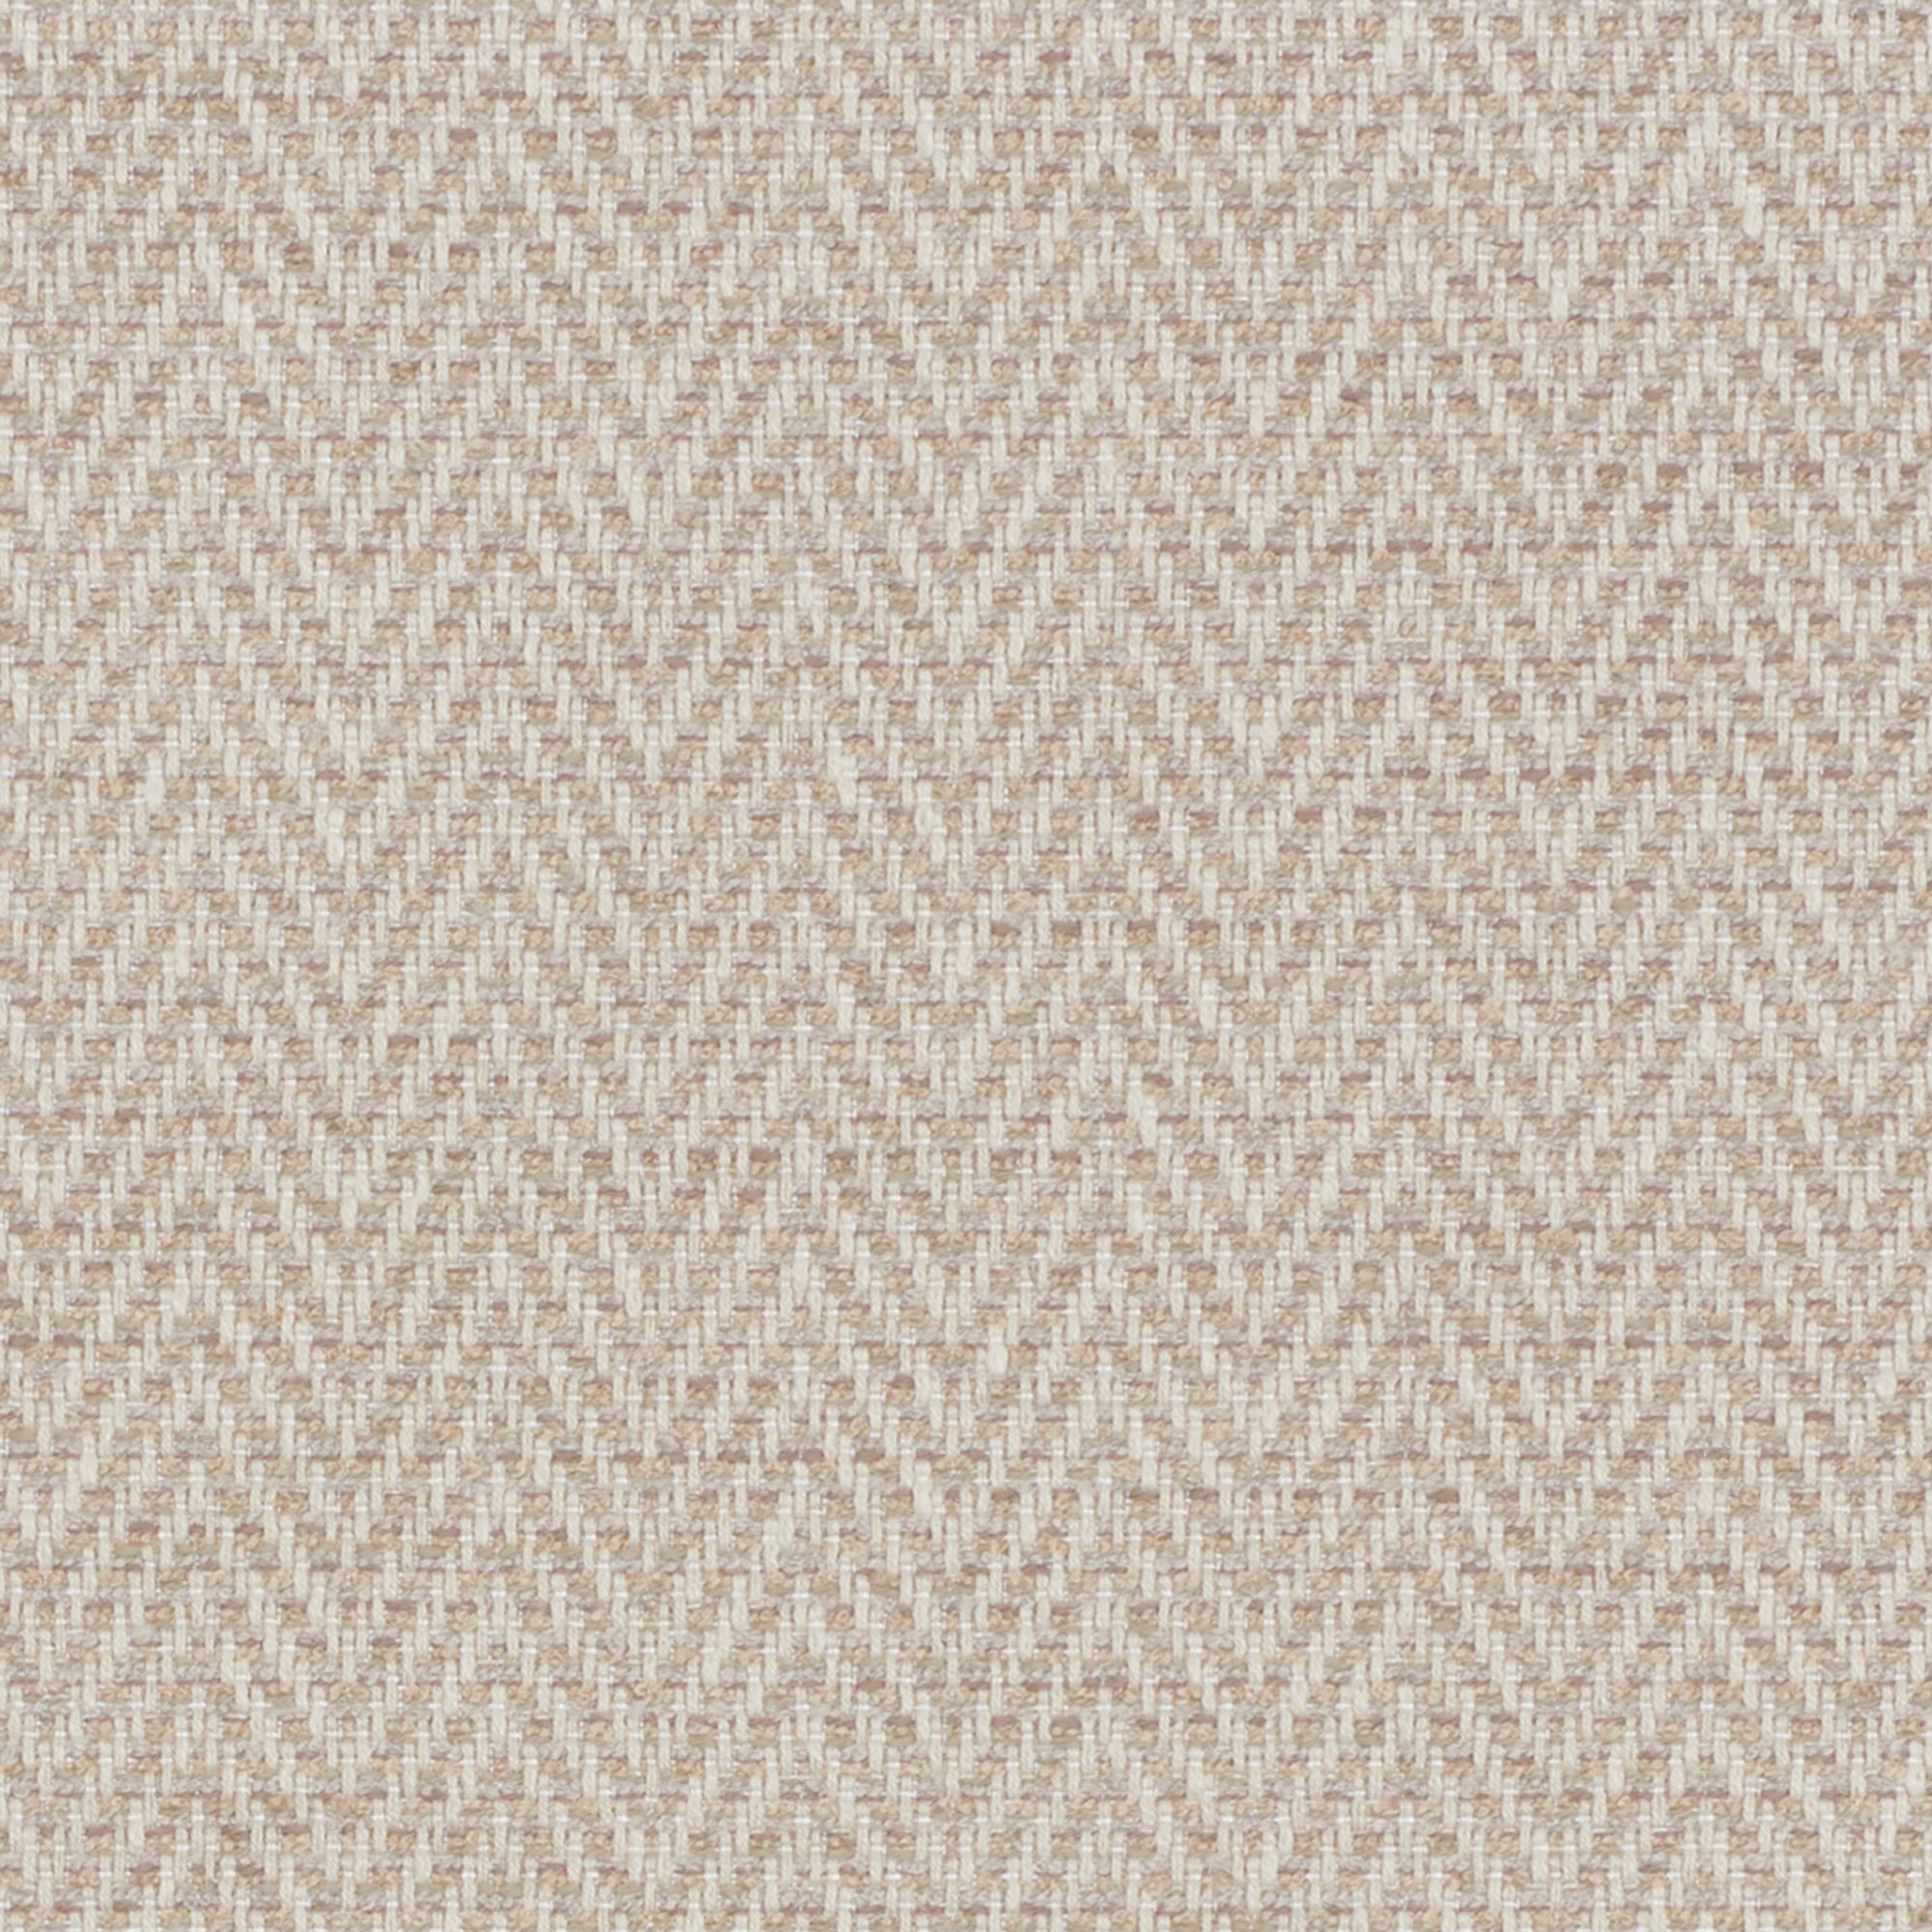 Everest Made to Measure Fabric Sample Everest Almond